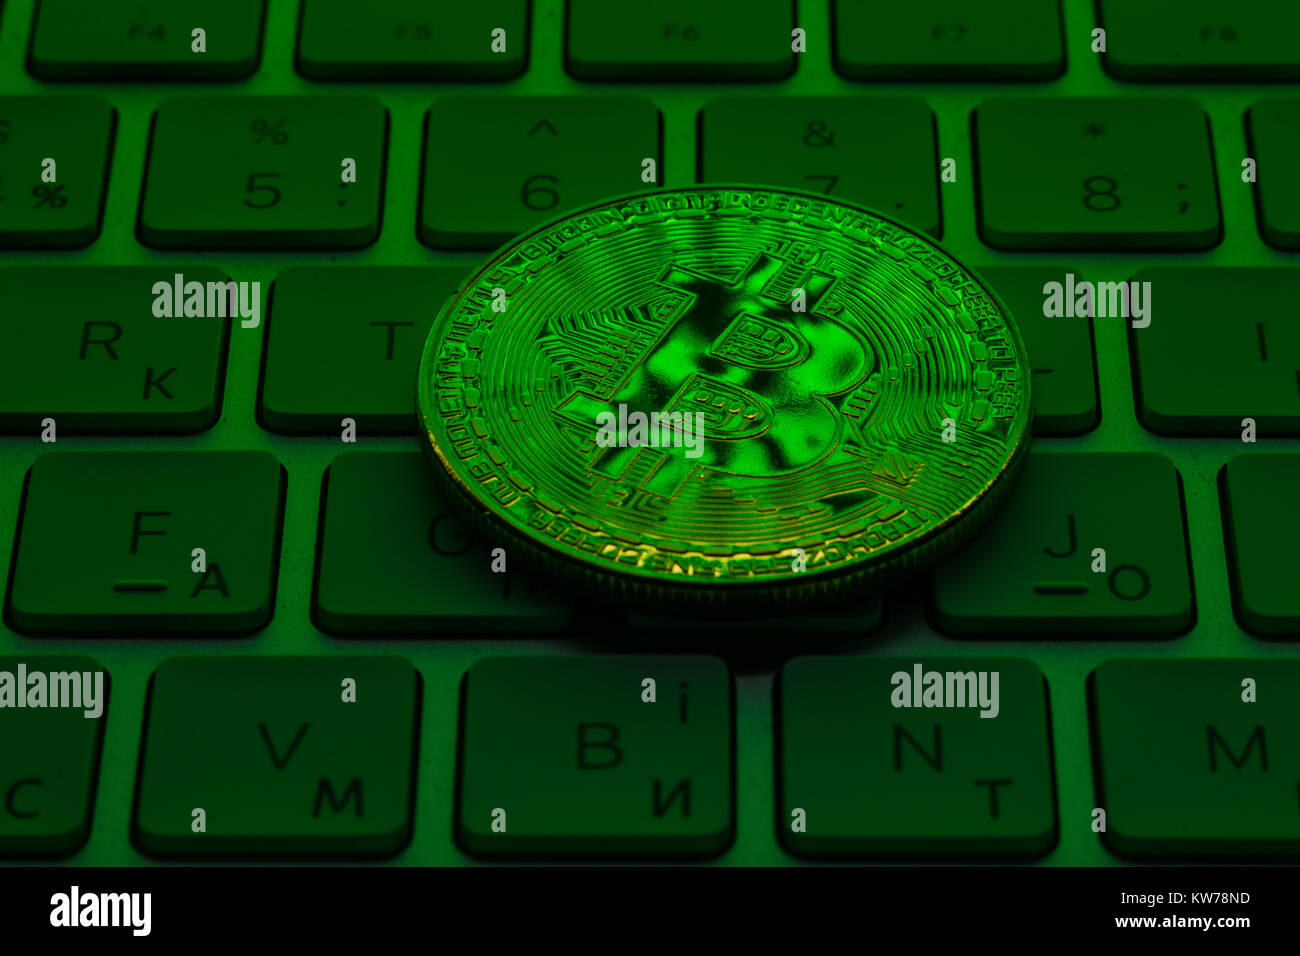 Gold Plated Iron Bitcoin on laptop keyboard with green neon light Stock  Photo - Alamy